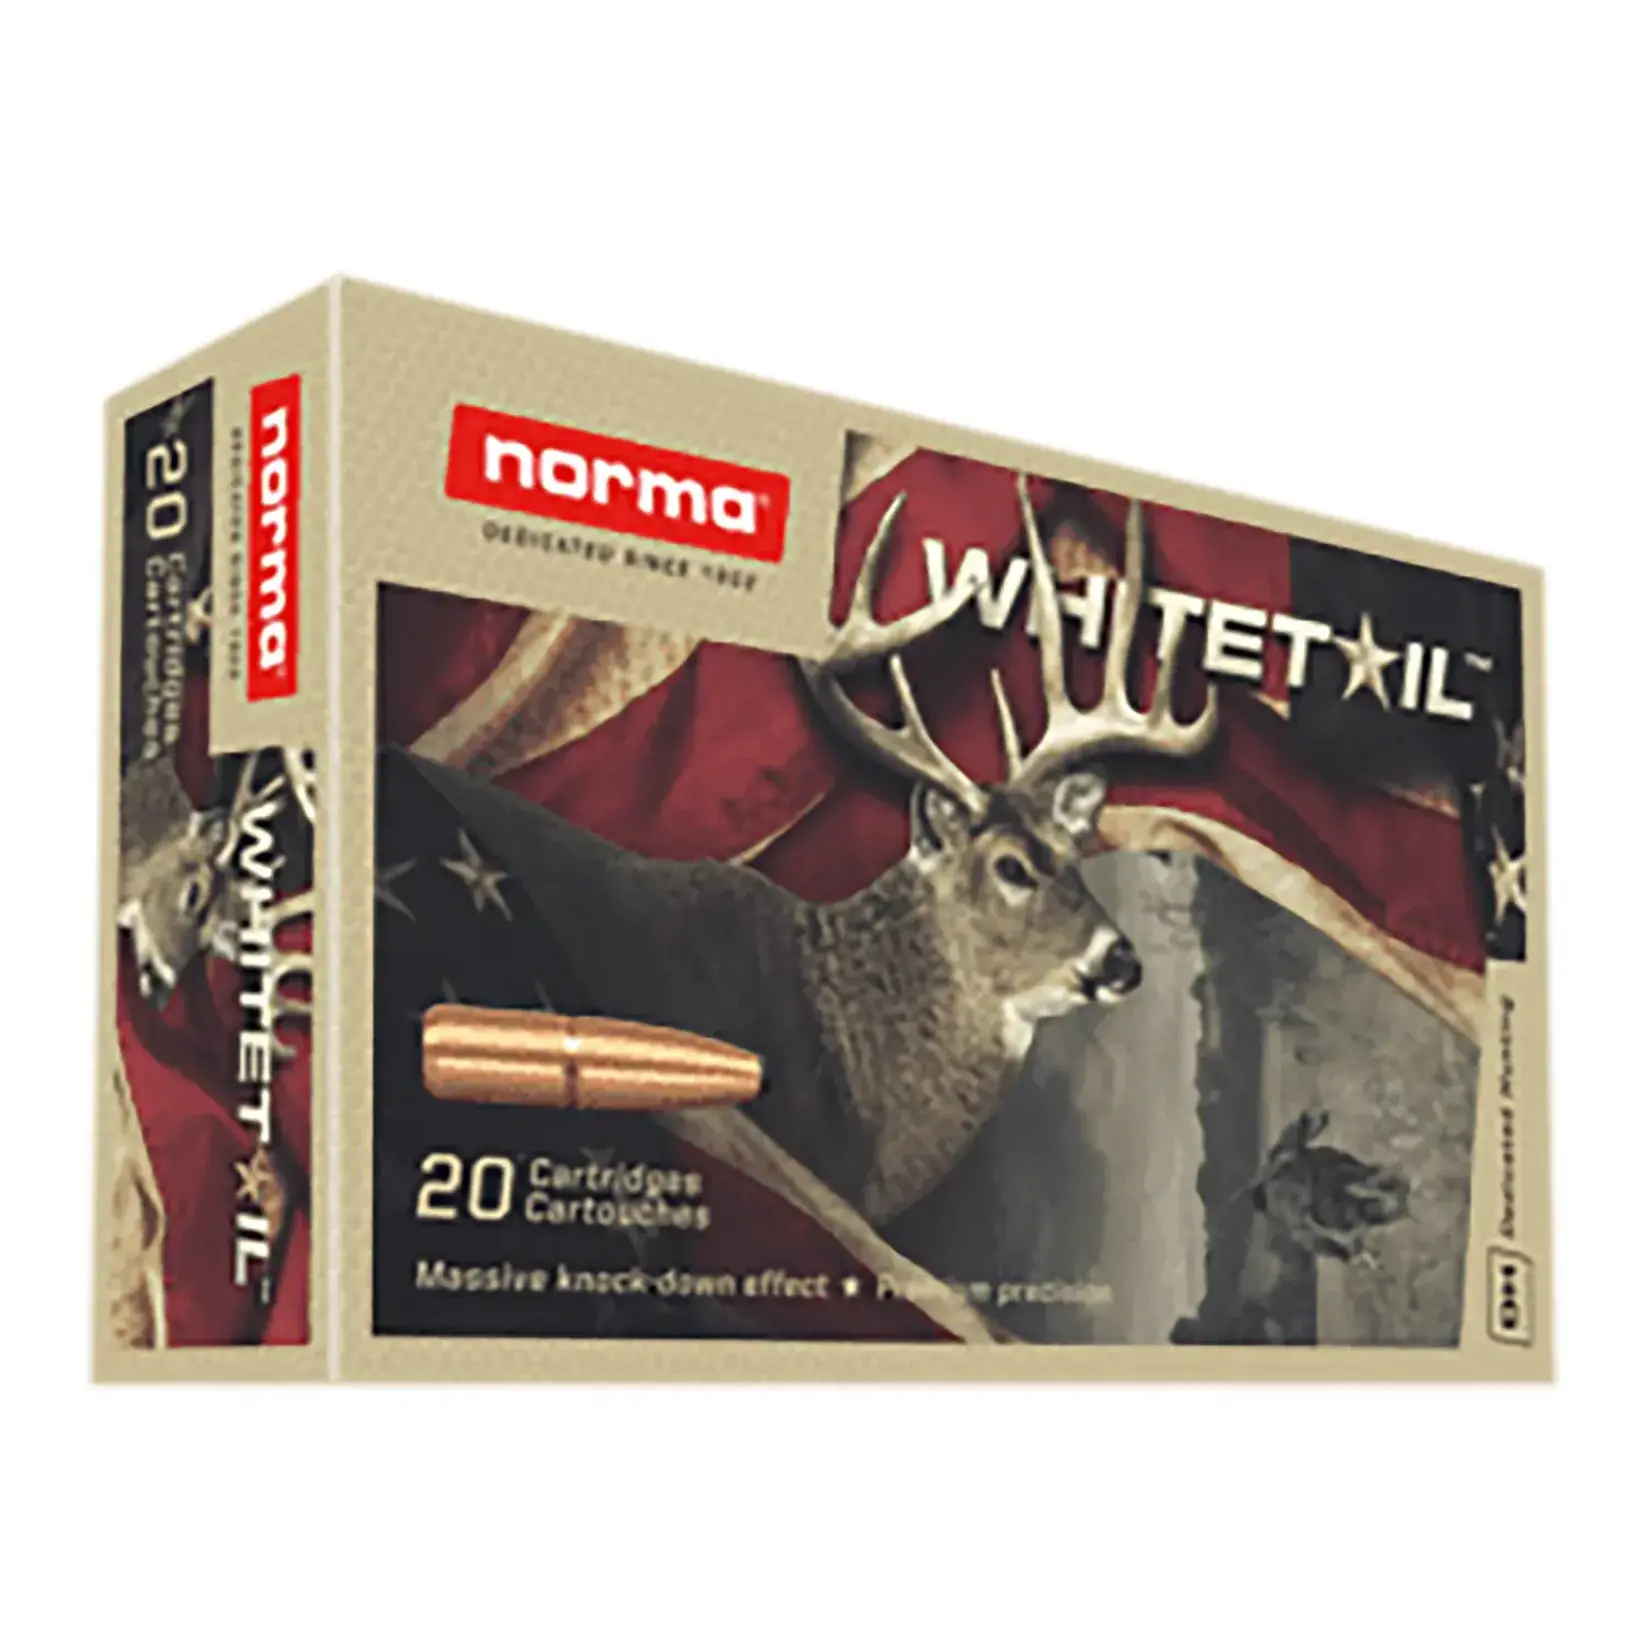 Norma Norma 6.5PRC 140gr Whitetail Soft Point (2887fps) - 20 Pack